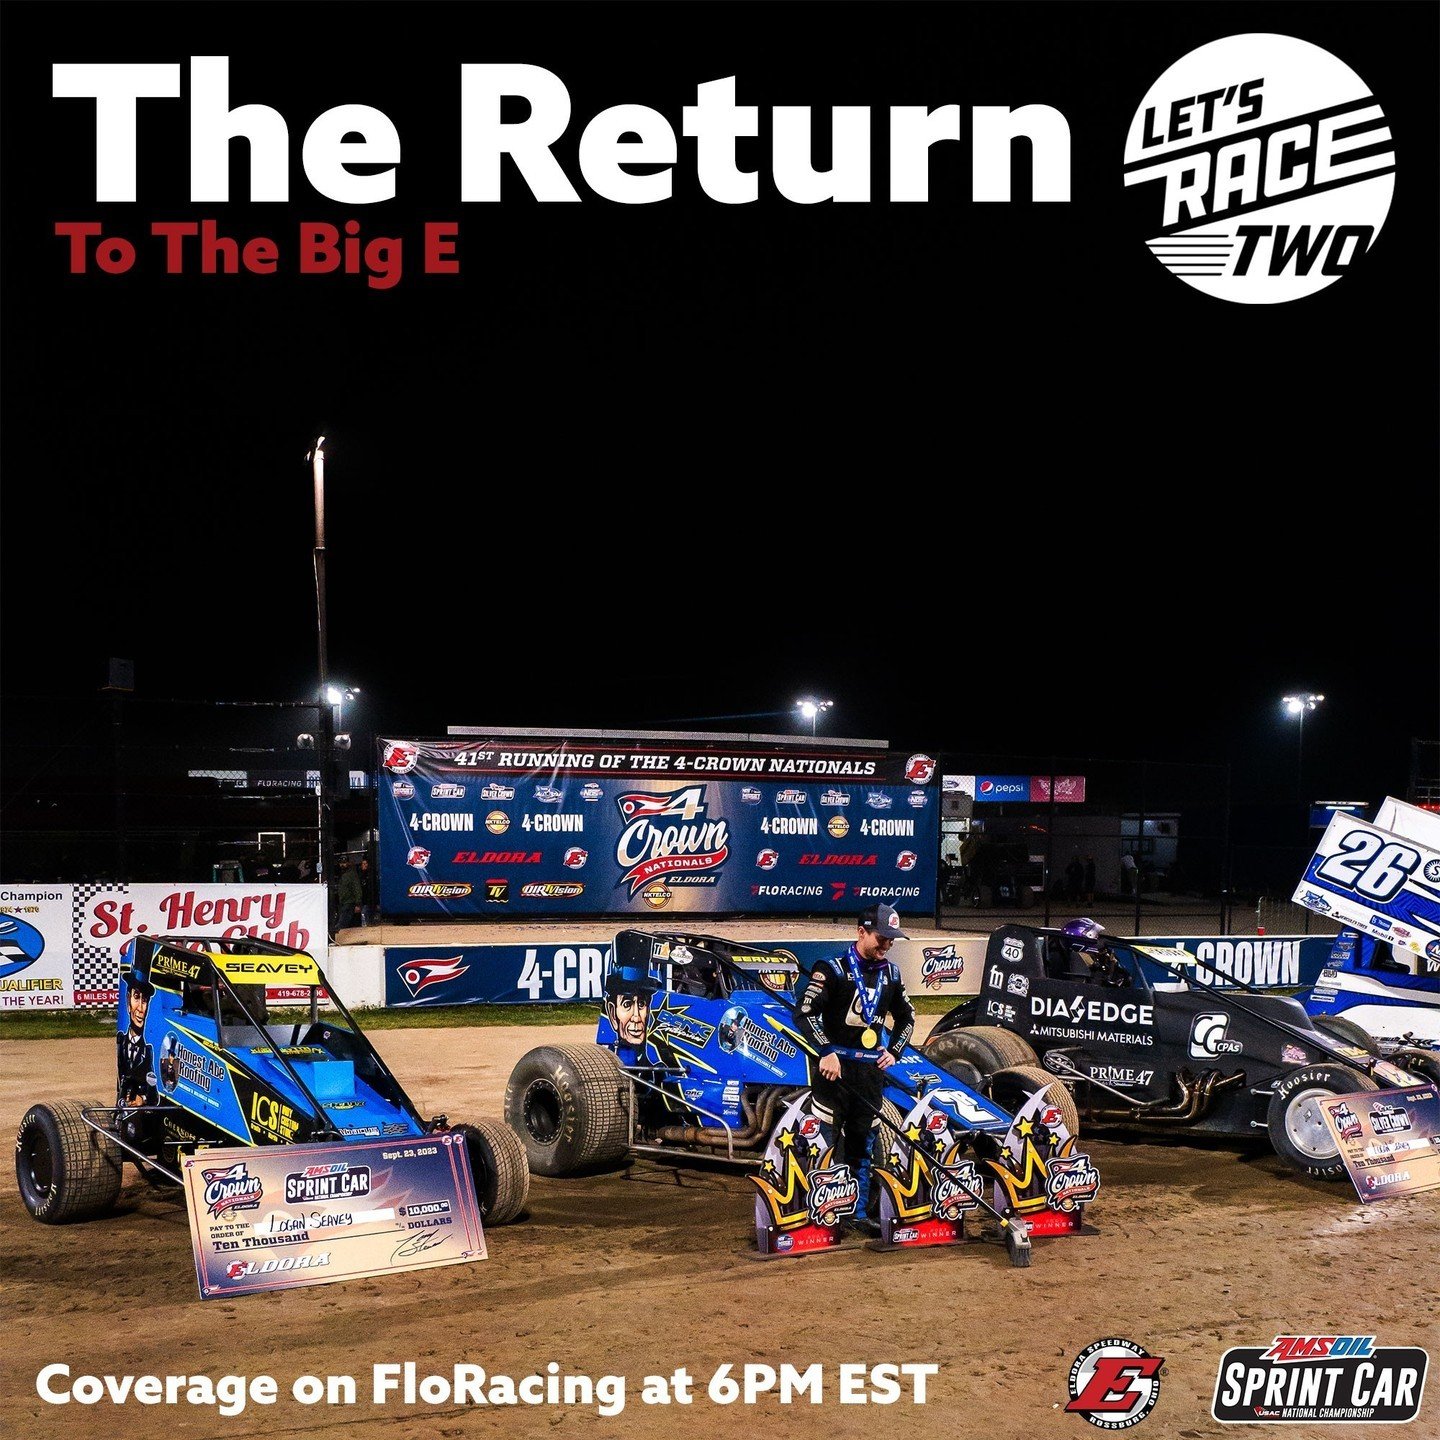 It's time for the first night of #LetsRaceTwo at Eldora Speedway with the USAC National Sprint Car series! Logan Seavey currently holds the points lead in sprint car competition, and looks to extend that advantage. Abacus Racing and Seavey return to 